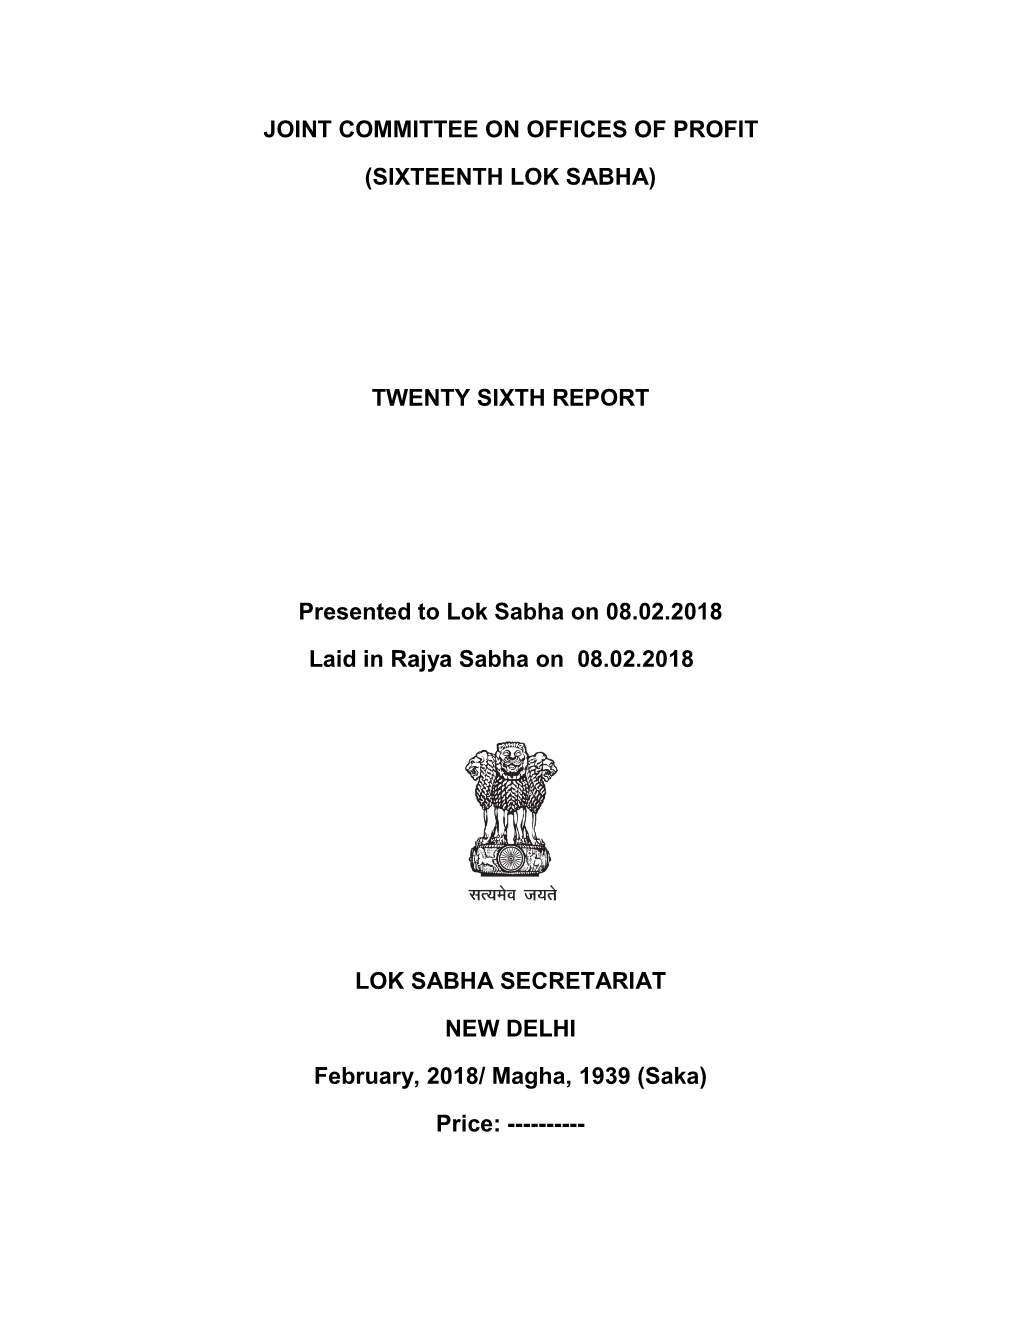 JOINT COMMITTEE on OFFICES of PROFIT (SIXTEENTH LOK SABHA) TWENTY SIXTH REPORT Presented to Lok Sabha on 08.02.2018 Laid in Rajy